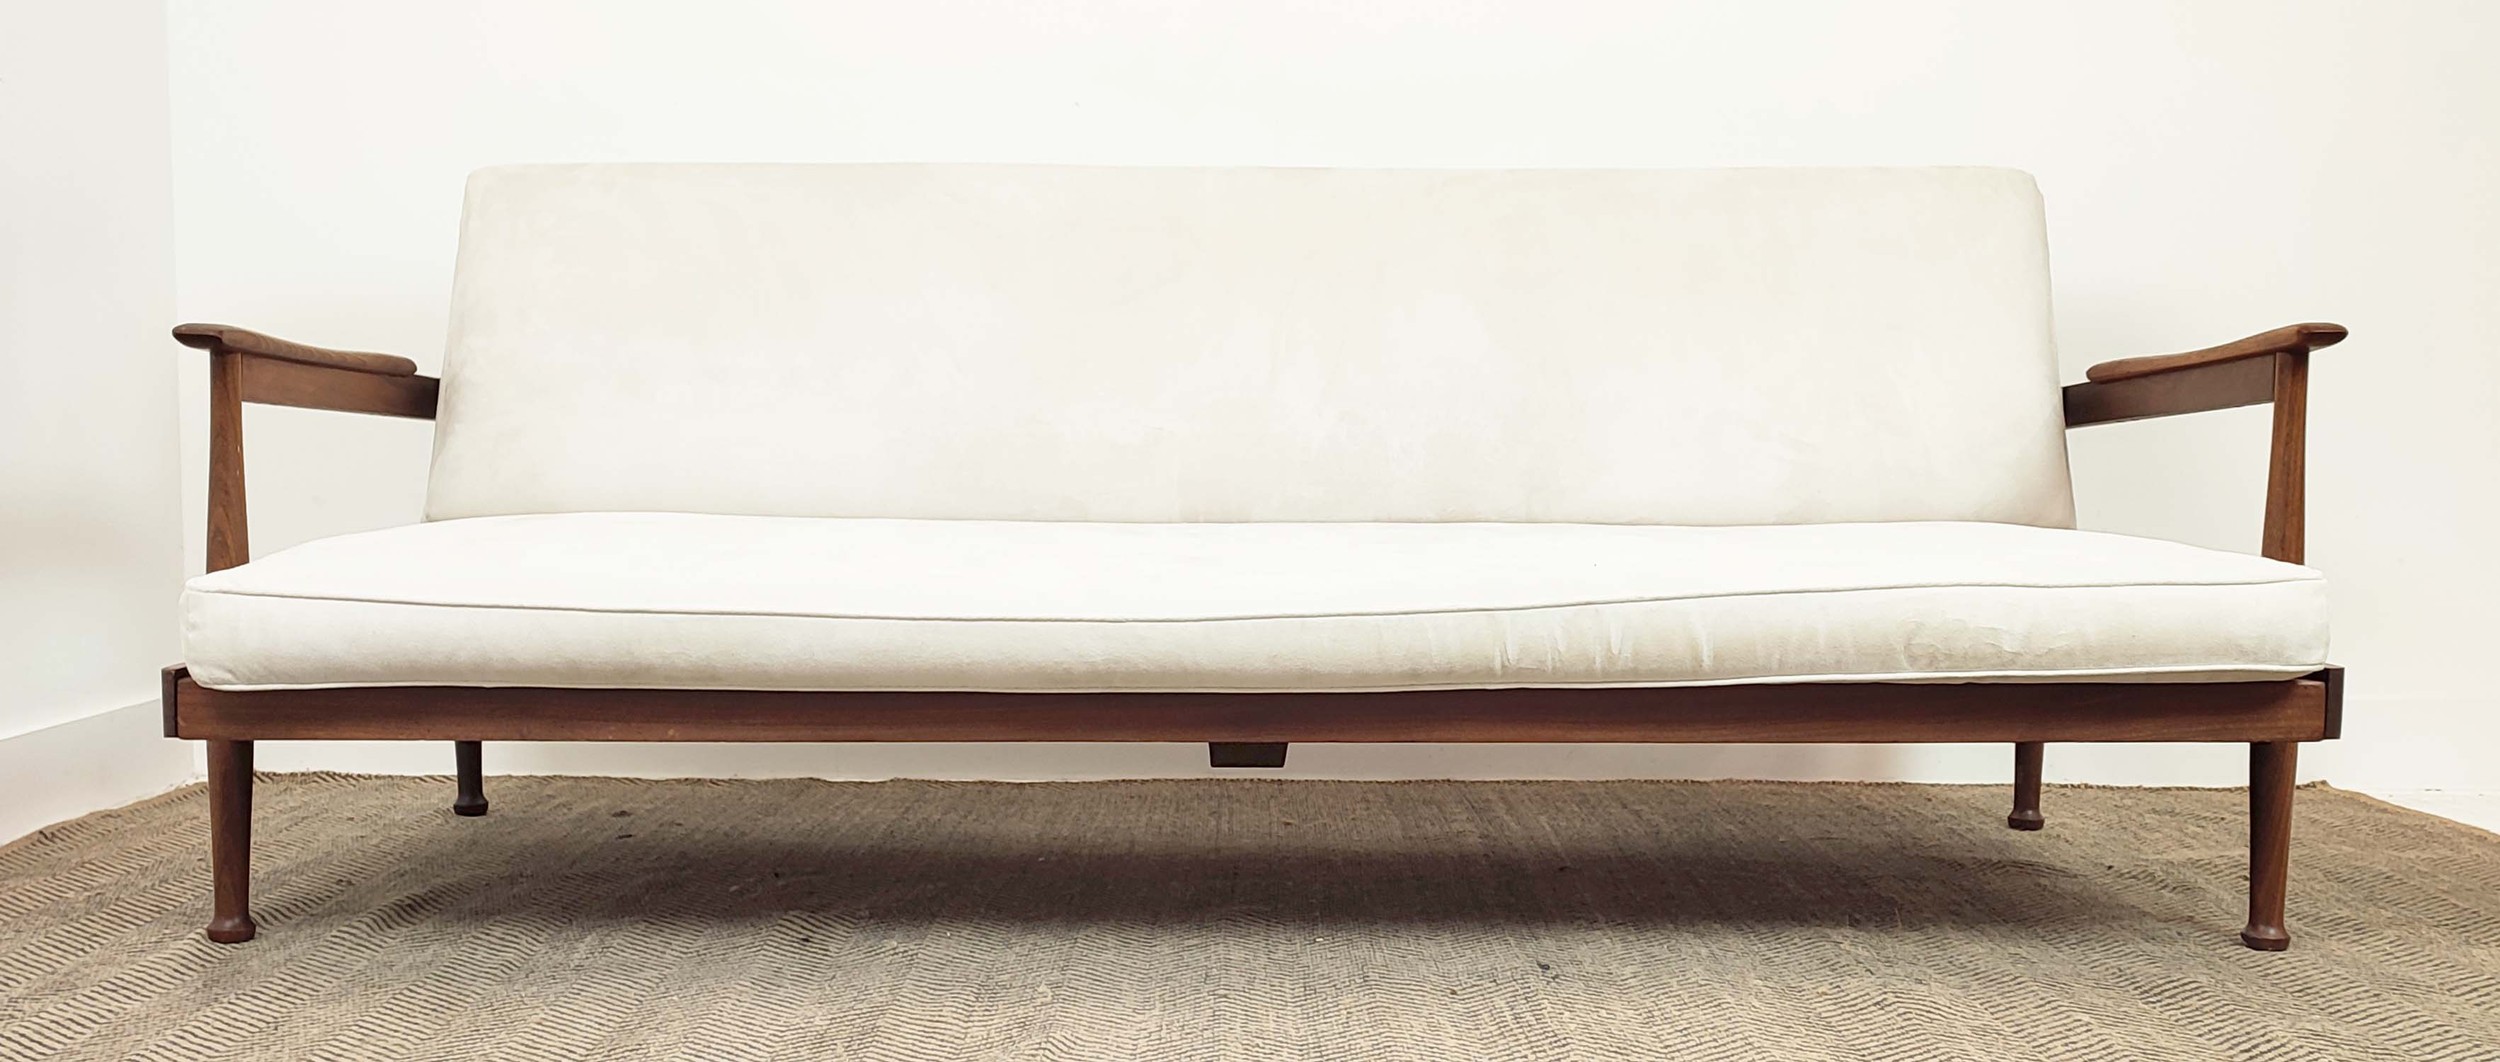 SOFA, vintage 20th century with a tilting back exposing hidden storage, 205cm W x 81cm D. - Image 2 of 9